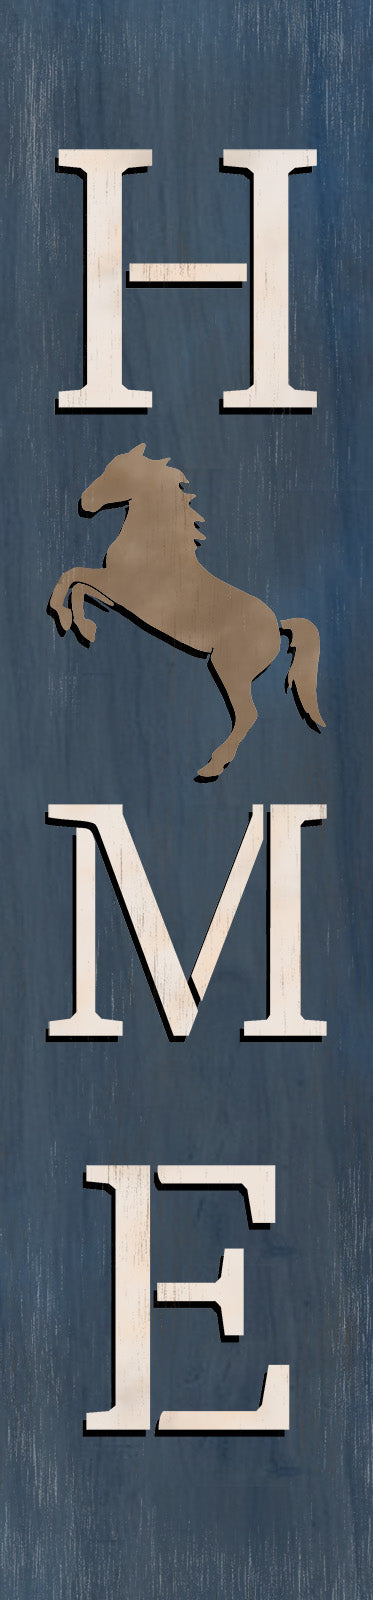 Home with Rearing Horse - Vertical Stencil by StudioR12 | Reusable Mylar Template | Use to Paint Wood Signs - Pallets - Banners - DIY Equestrian Style Decor - Select Size | STCL2527